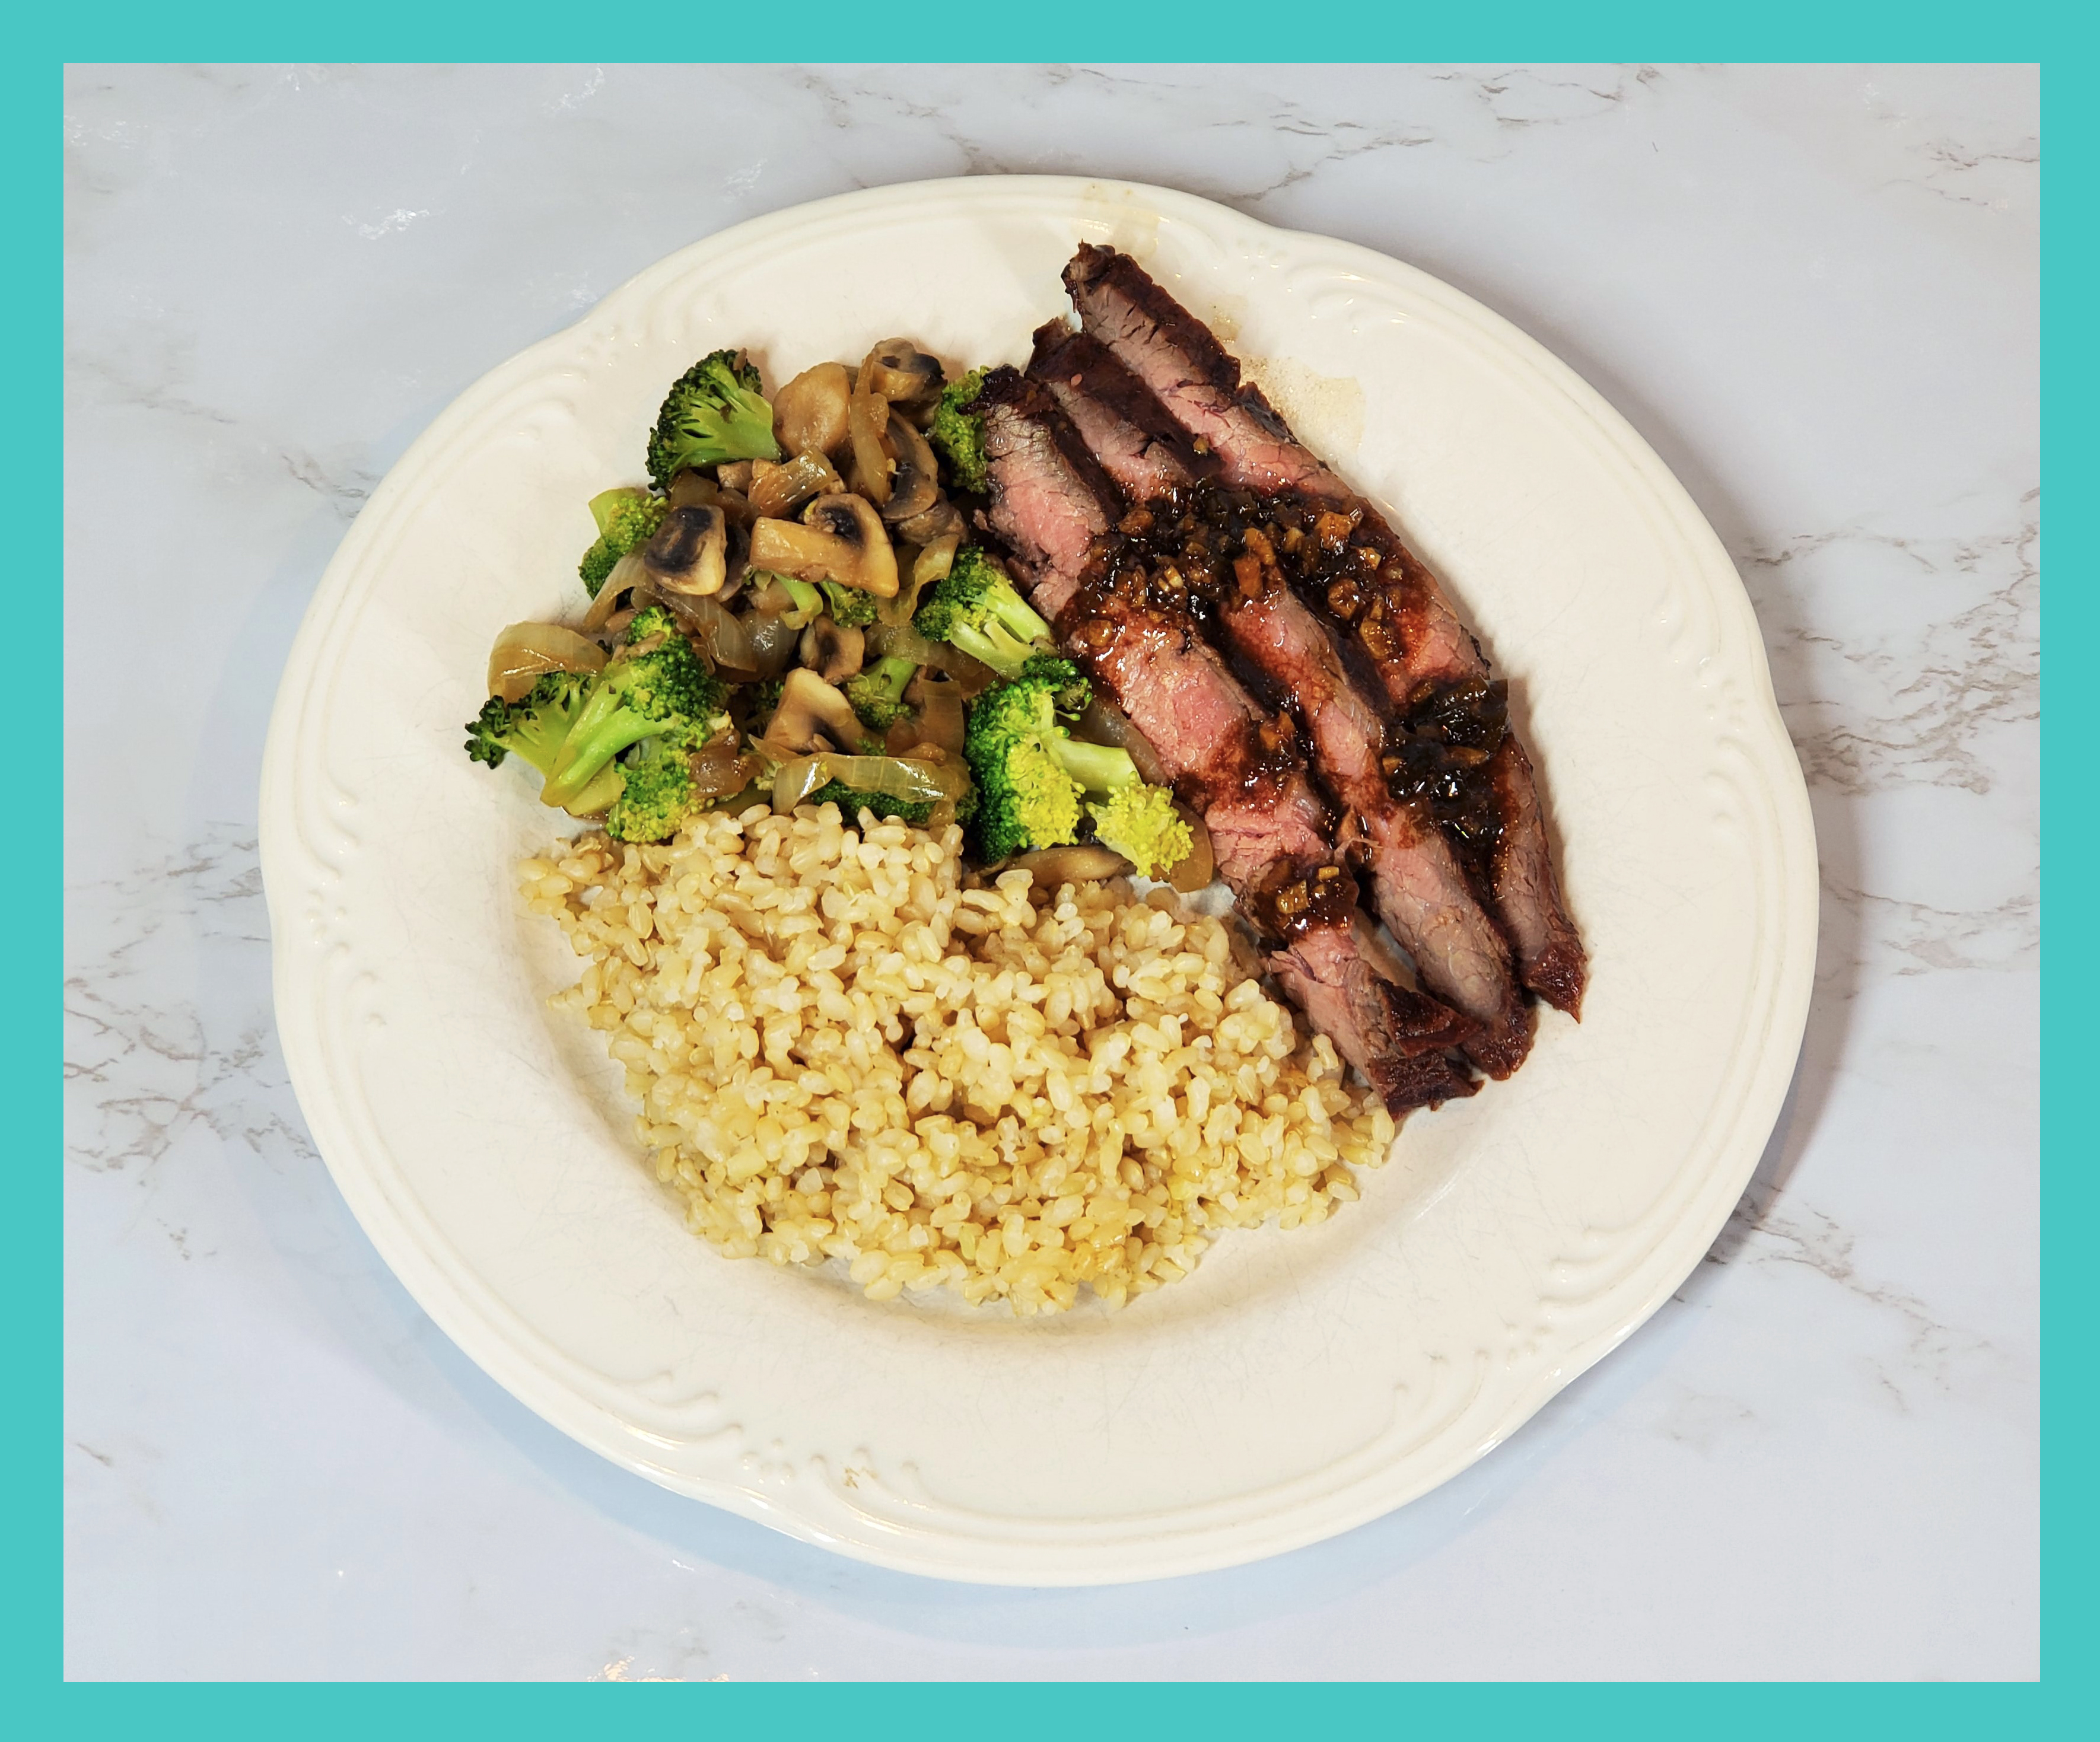 Flank Steak drizzled in sauce on a white plate with short grain brown rice, broccoli/mushrooms/onions. On a white marble background.